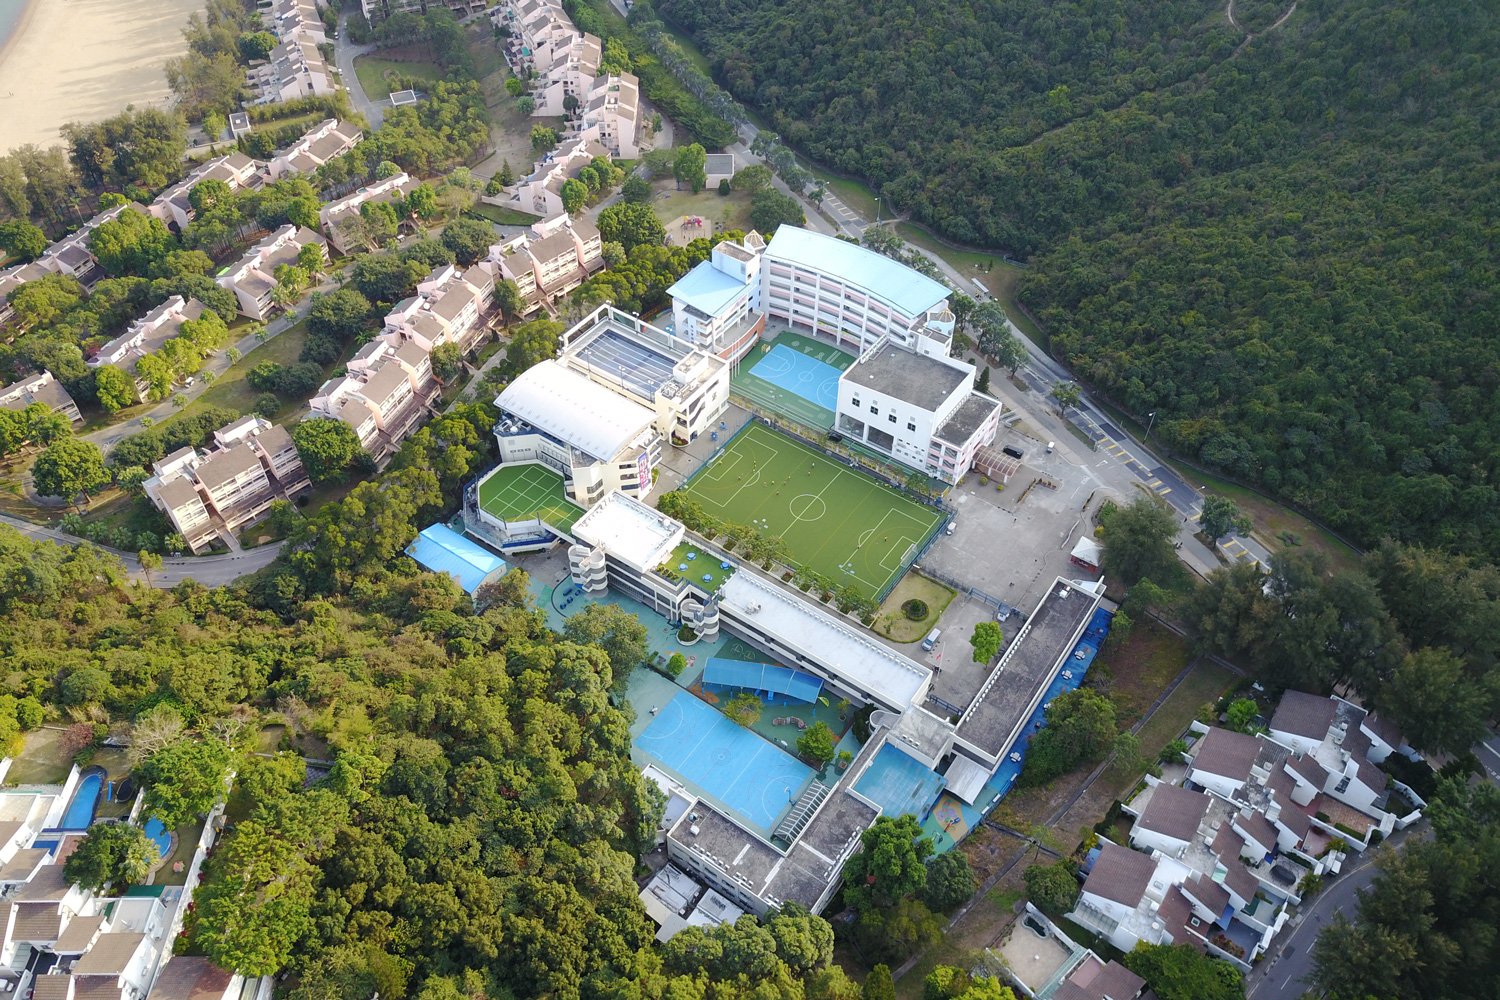 Main-Campus_DroneView_1-(2).jpg